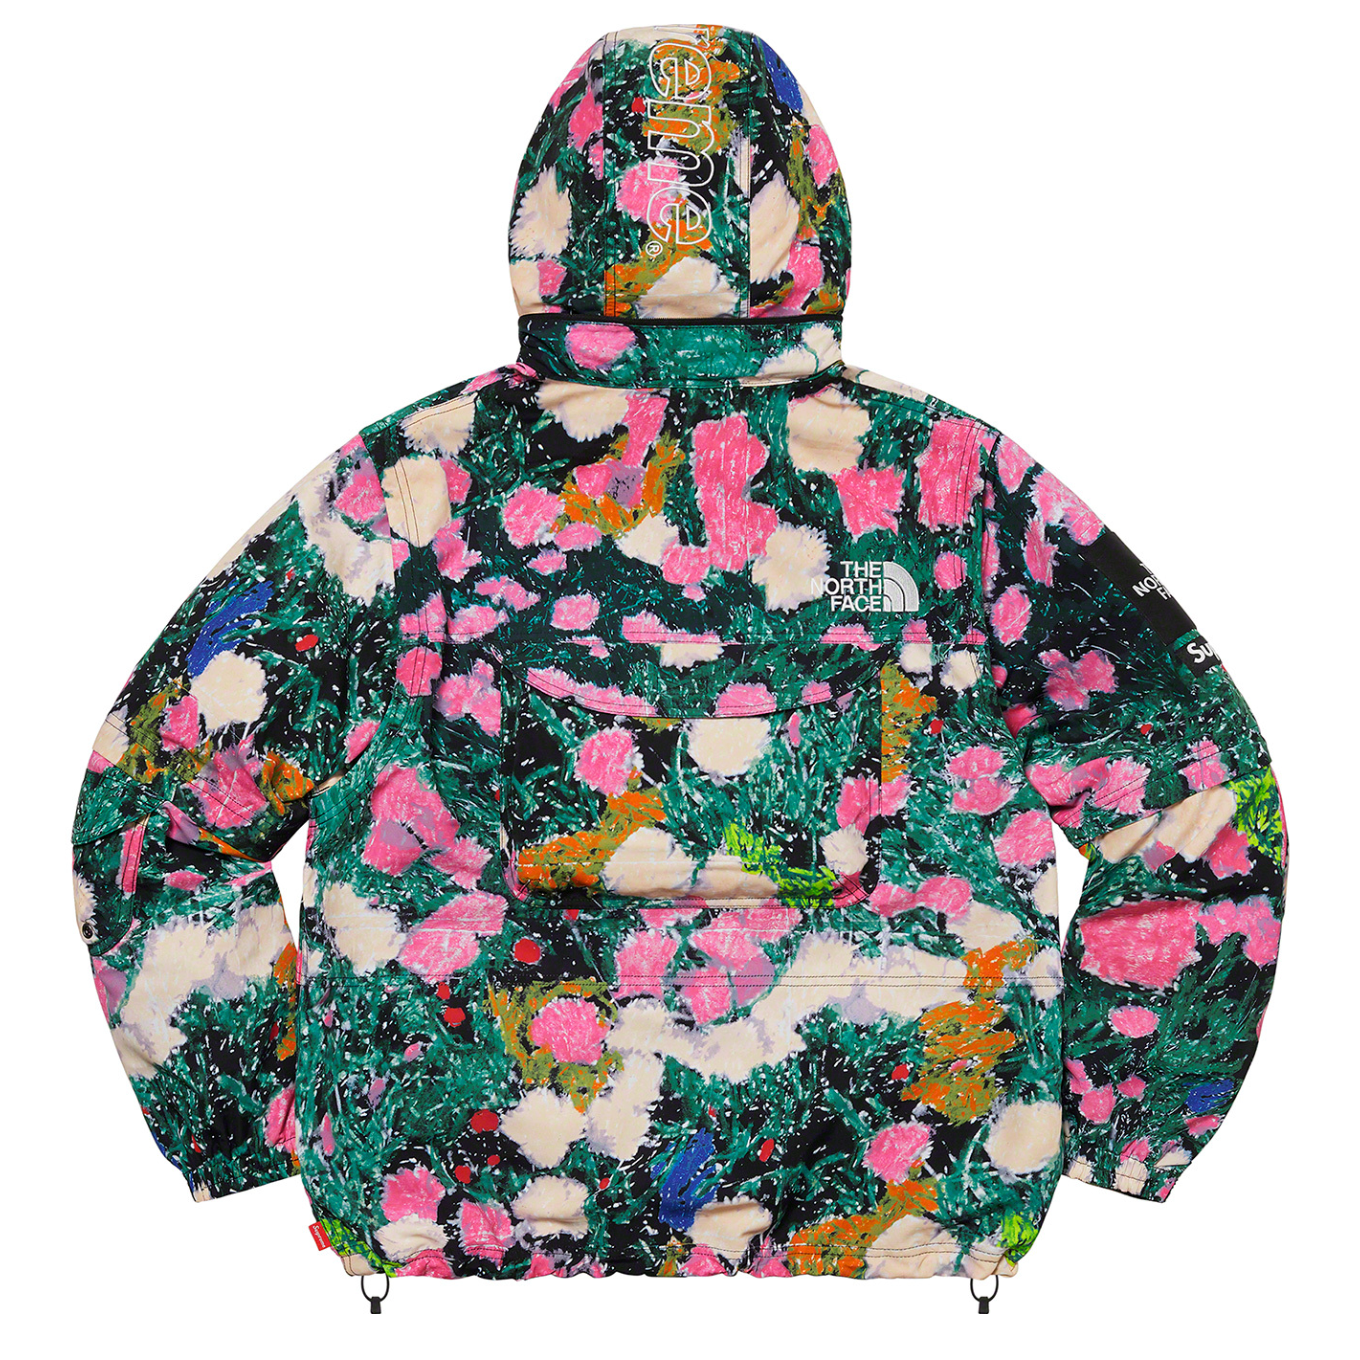 Supreme x The North Face - Flowers Print Trekking Convertible